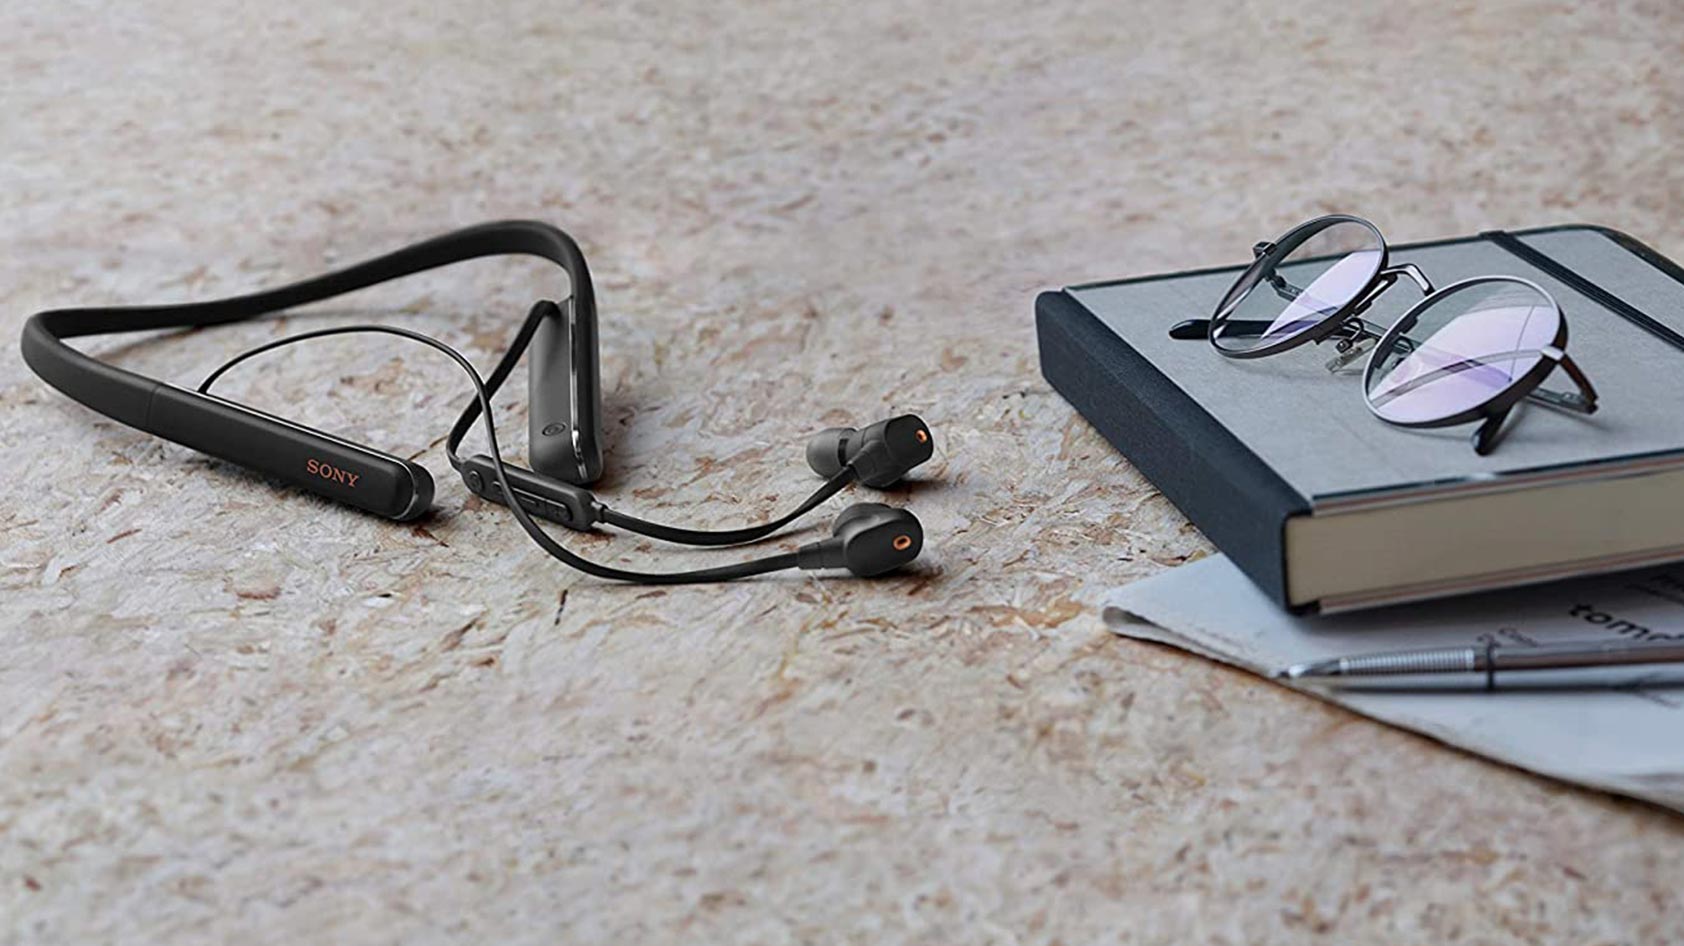 The Sony WI-1000XM2 rest on a surface next to a book and eyeglasses.